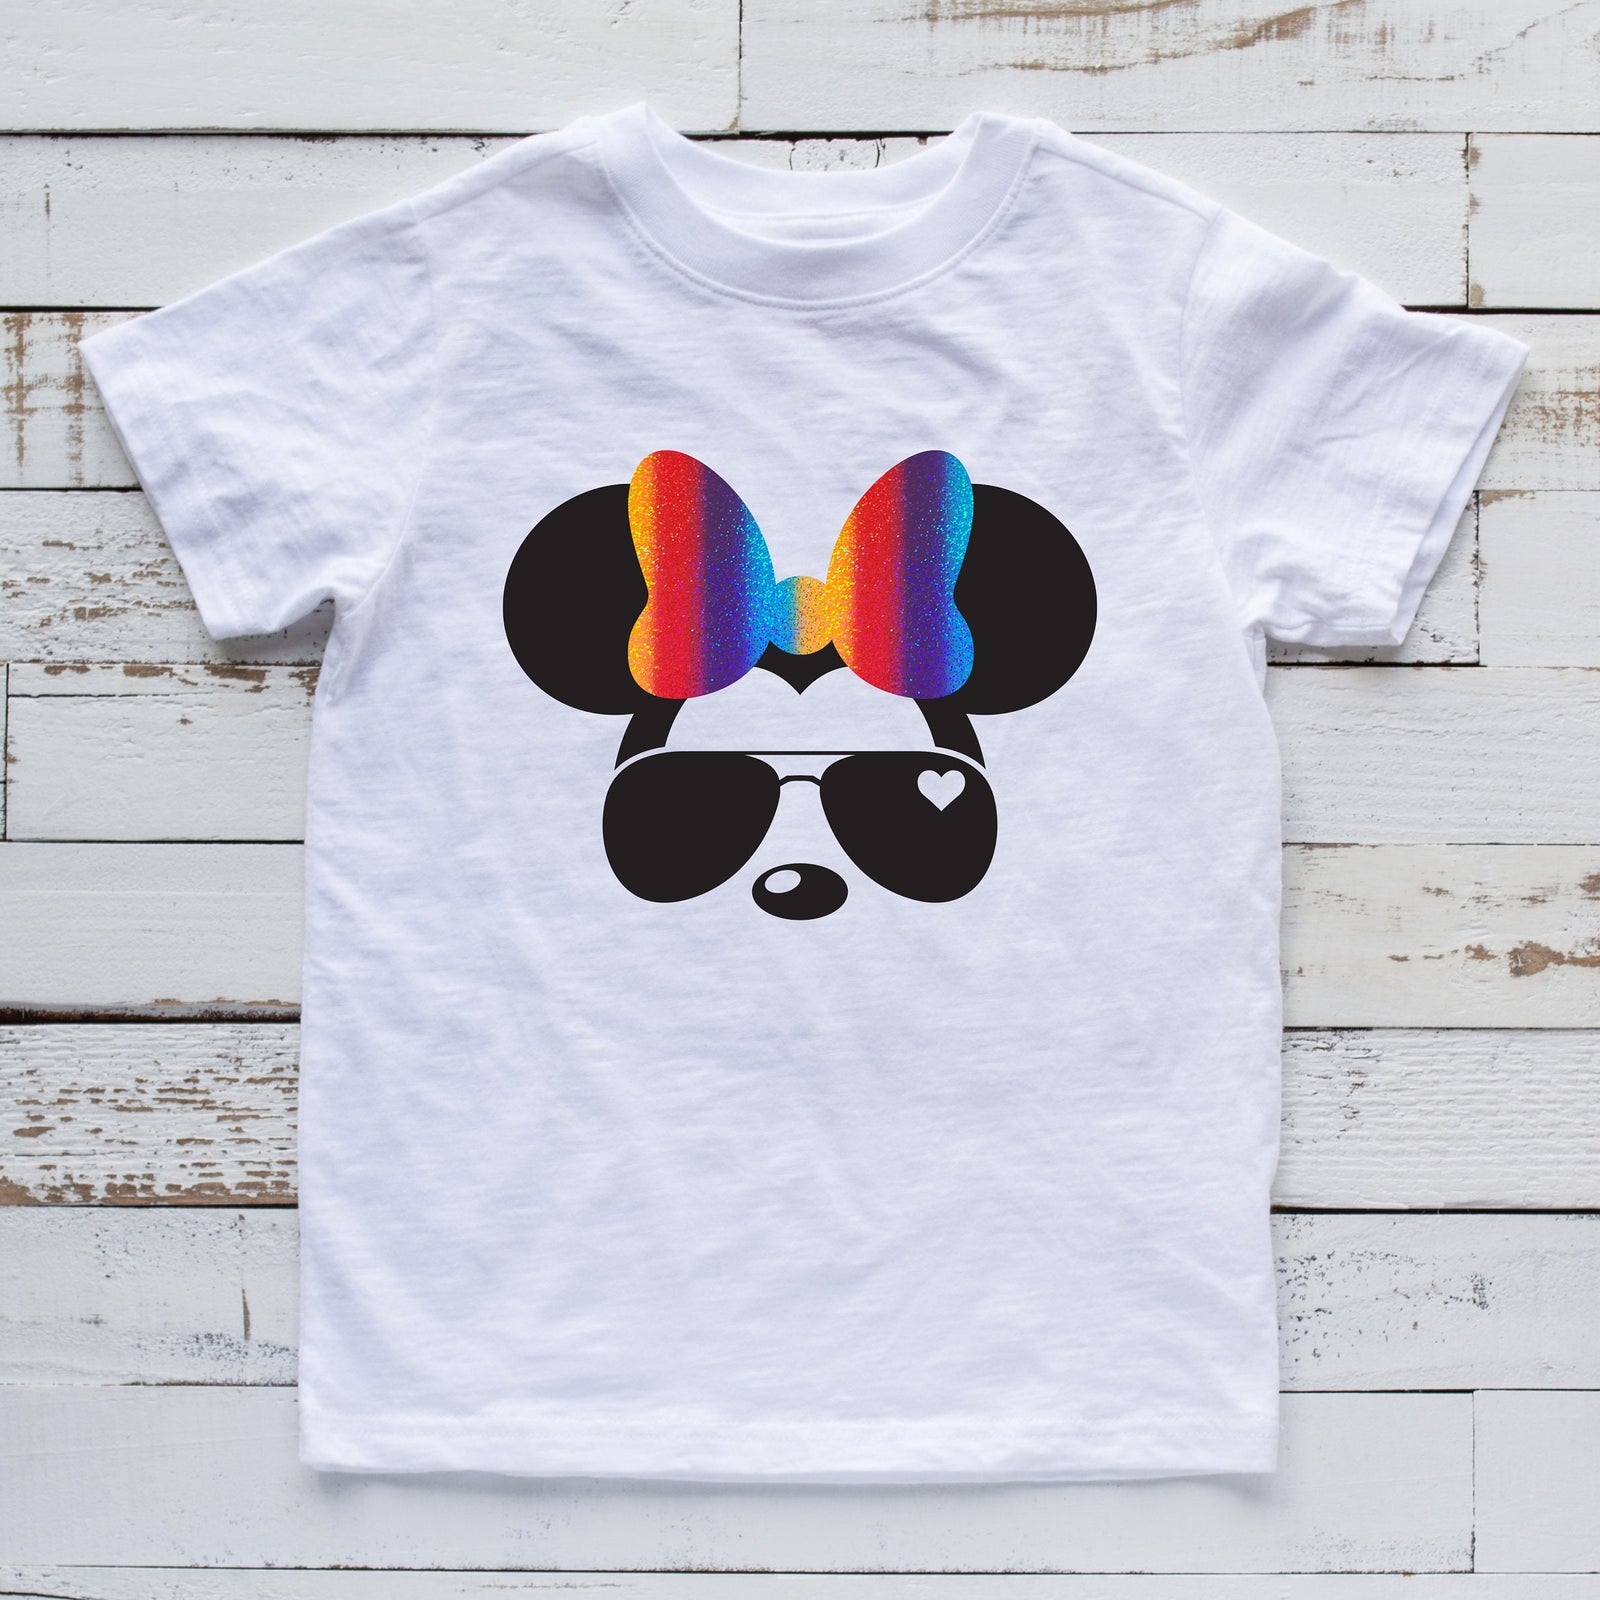 Minnie Mouse Aviator Sunglasses Disney T shirt -  infant Toddler or Youth - Rainbow Glitter